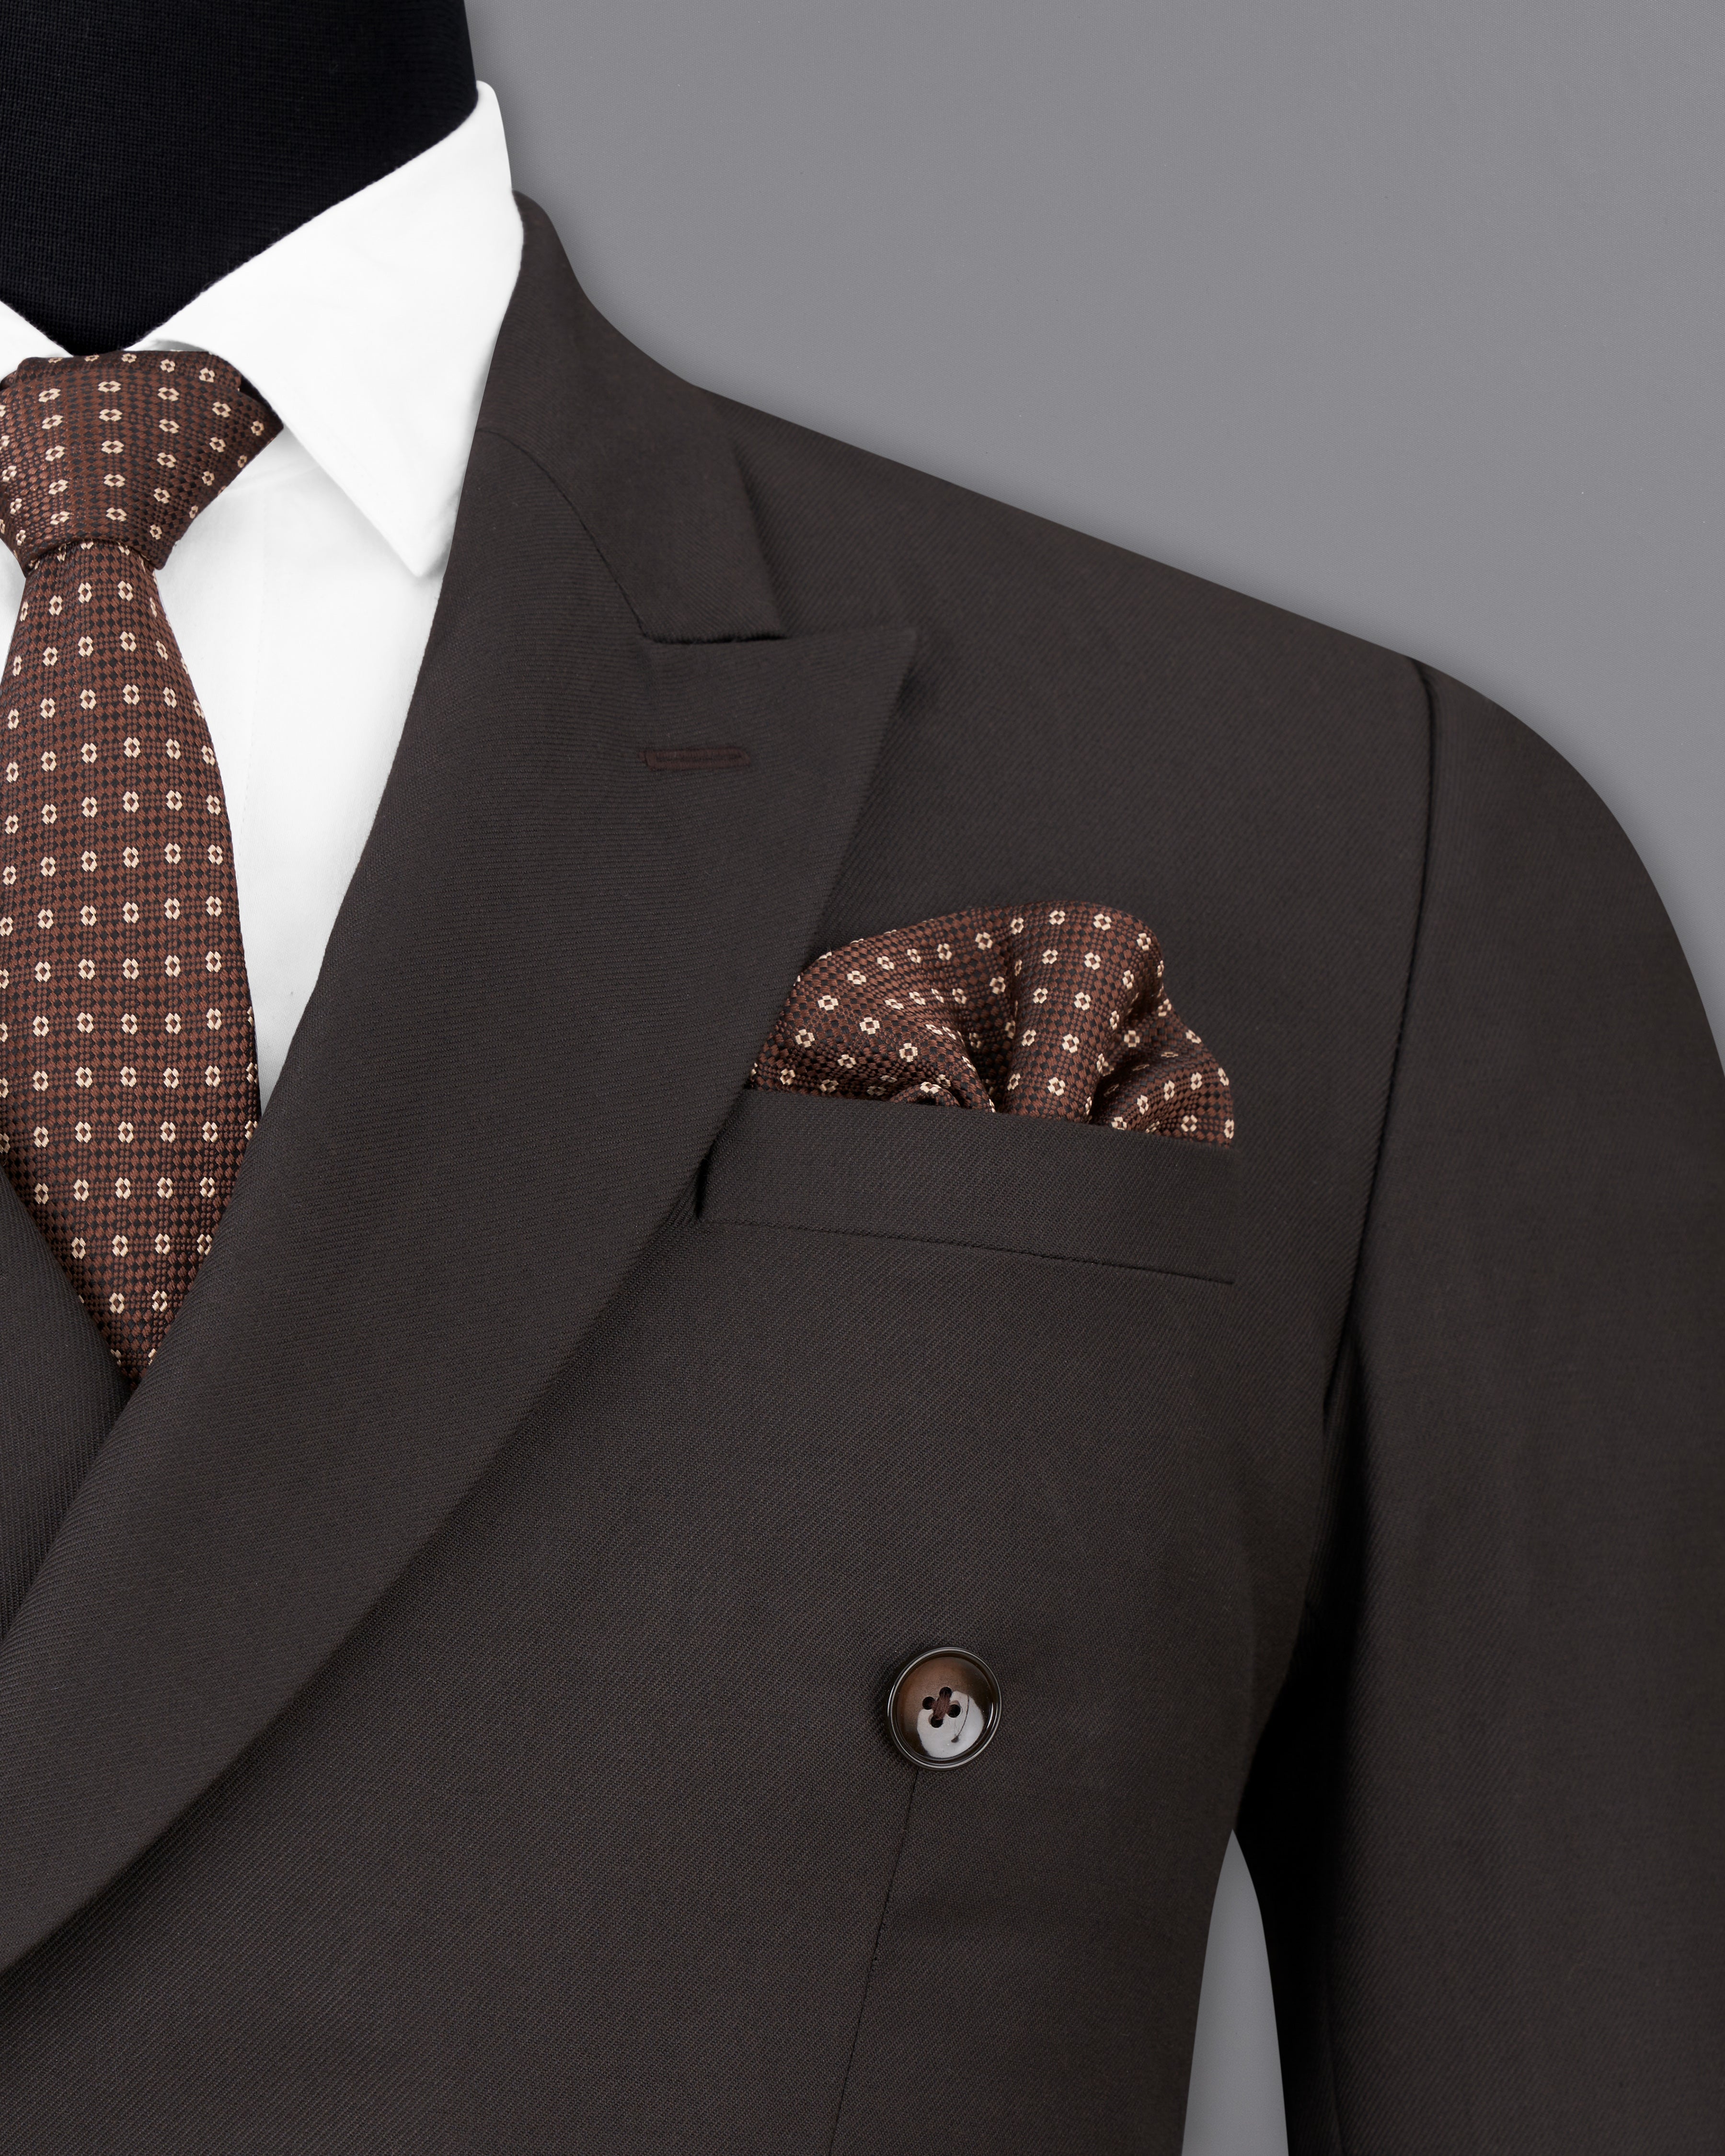 Eclipse Brown Double Breasted Suit ST2500-DB-36, ST2500-DB-38, ST2500-DB-40, ST2500-DB-42, ST2500-DB-44, ST2500-DB-46, ST2500-DB-48, ST2500-DB-50, ST2500-DB-52, ST2500-DB-54, ST2500-DB-56, ST2500-DB-58, ST2500-DB-60